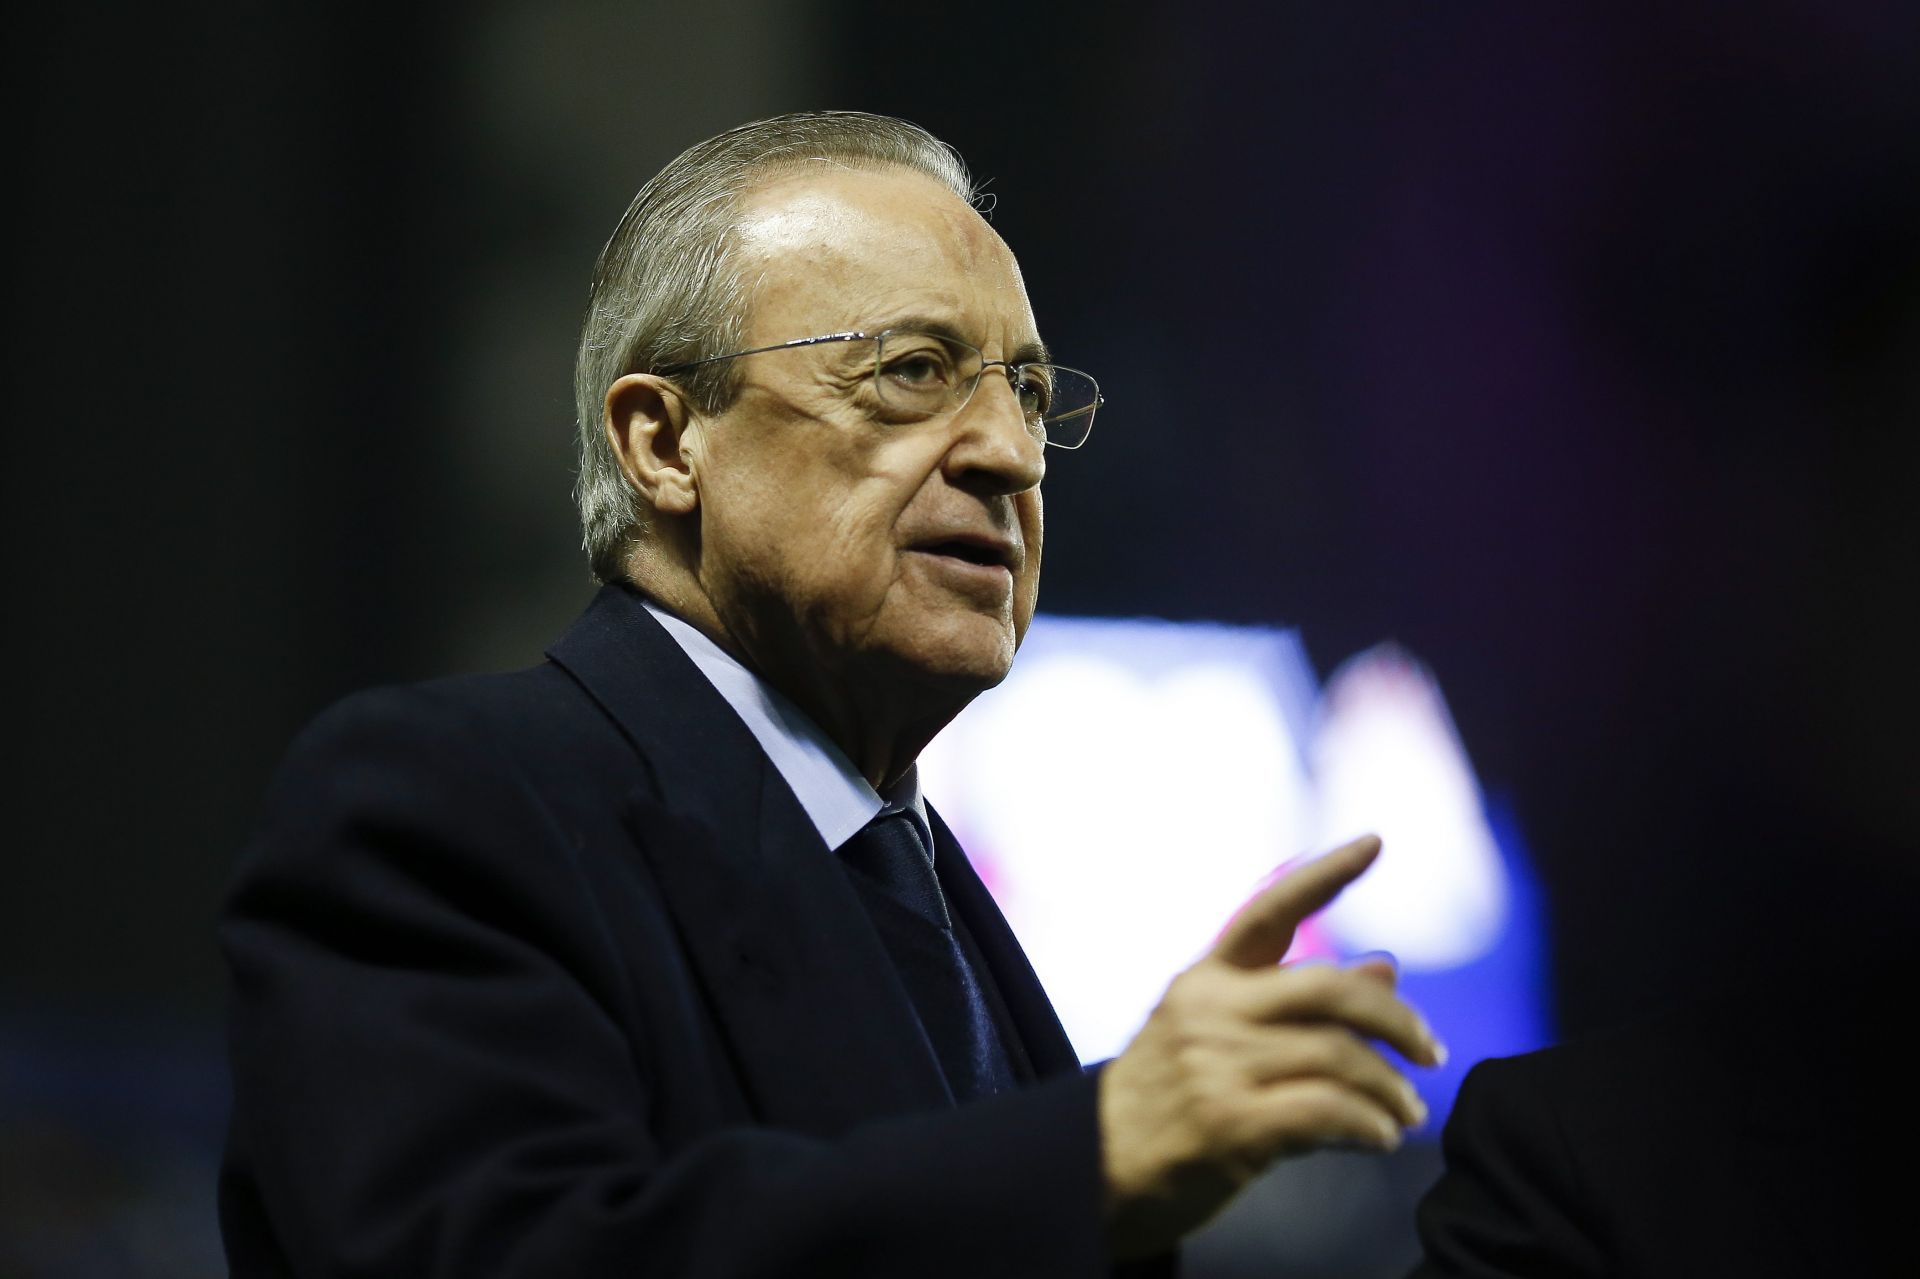 Real Madrid president Florentino Perez has not given up on his Super League dream.